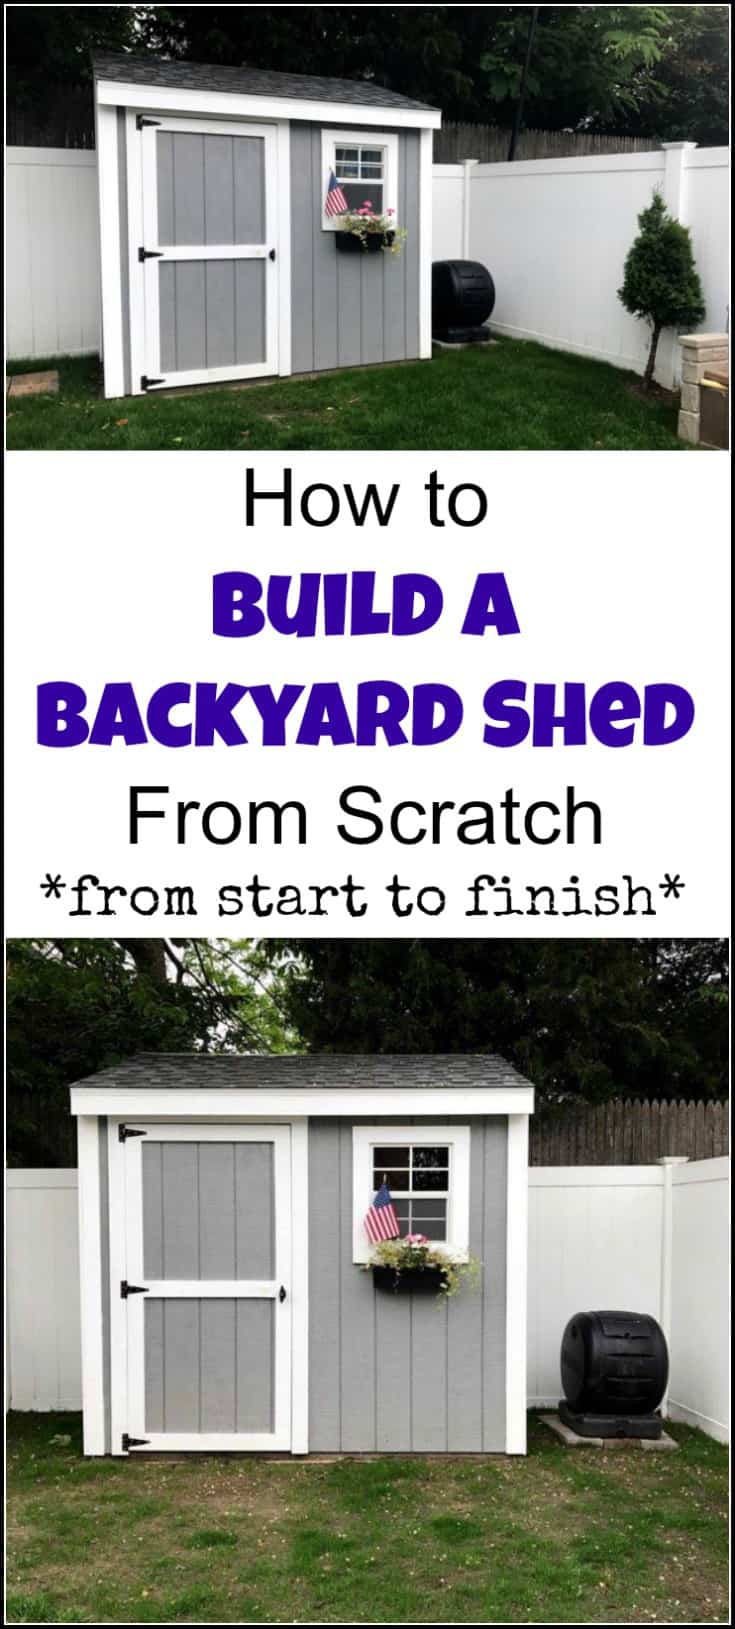 How to build a shed from scratch. Not only how to build a shed but how to do it with your spouse and your kids. Not an easy task. |how to build a shed | build a shed from scratch | build a shed with kids | how to build a storage shed, building a shed, how to build a shed roof, how to build a shed door, small storage shed, diy shed, shed designs, wooden sheds, shed foundation, yard sheds, backyard shed